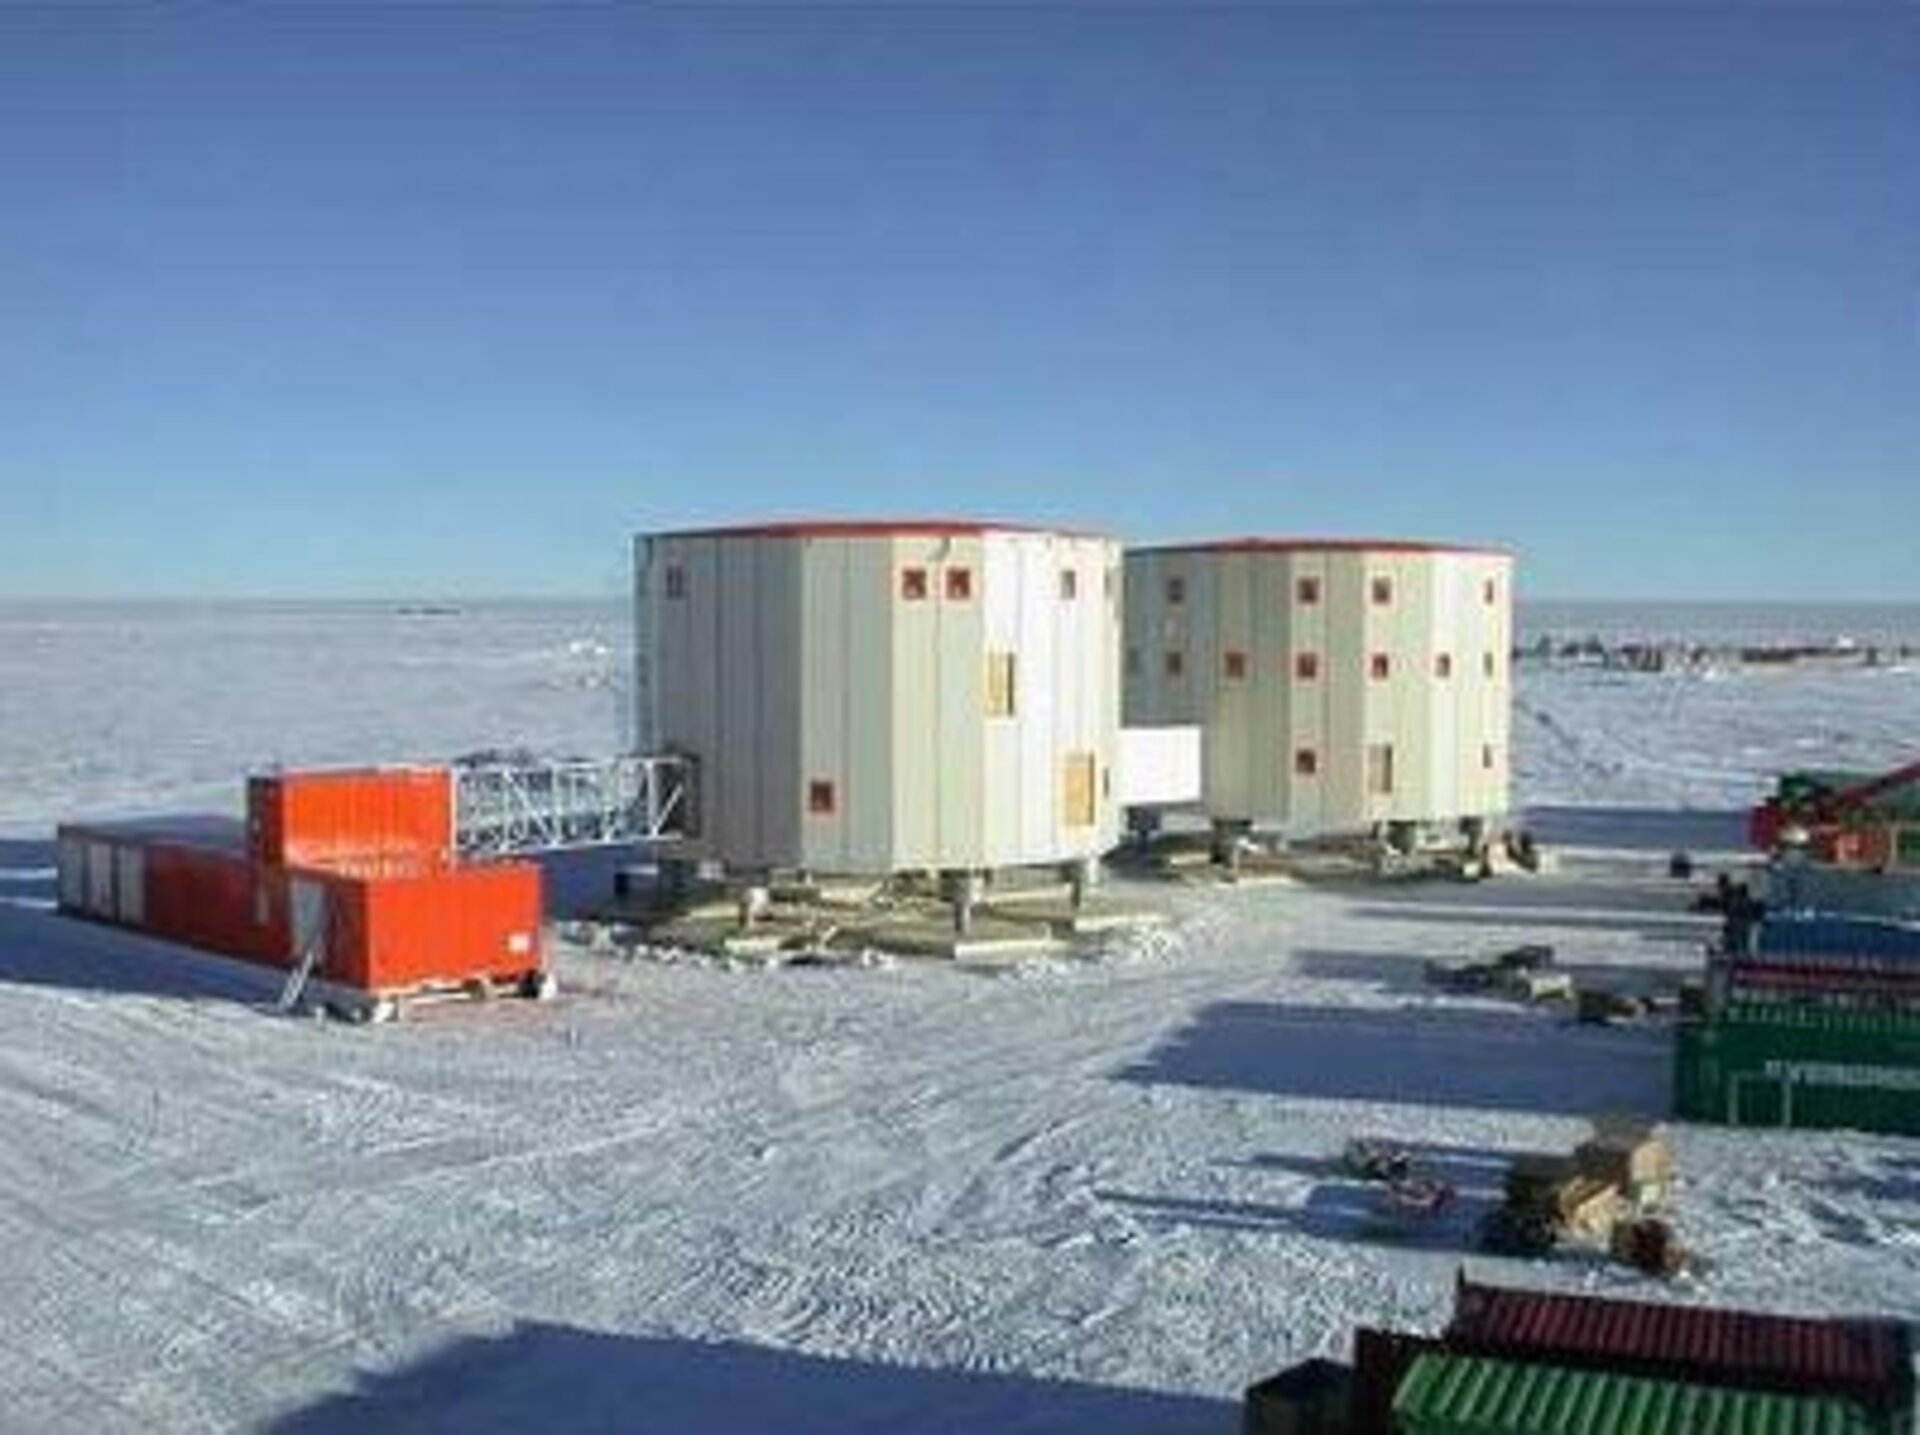 Space tech cleans water in Antarctica